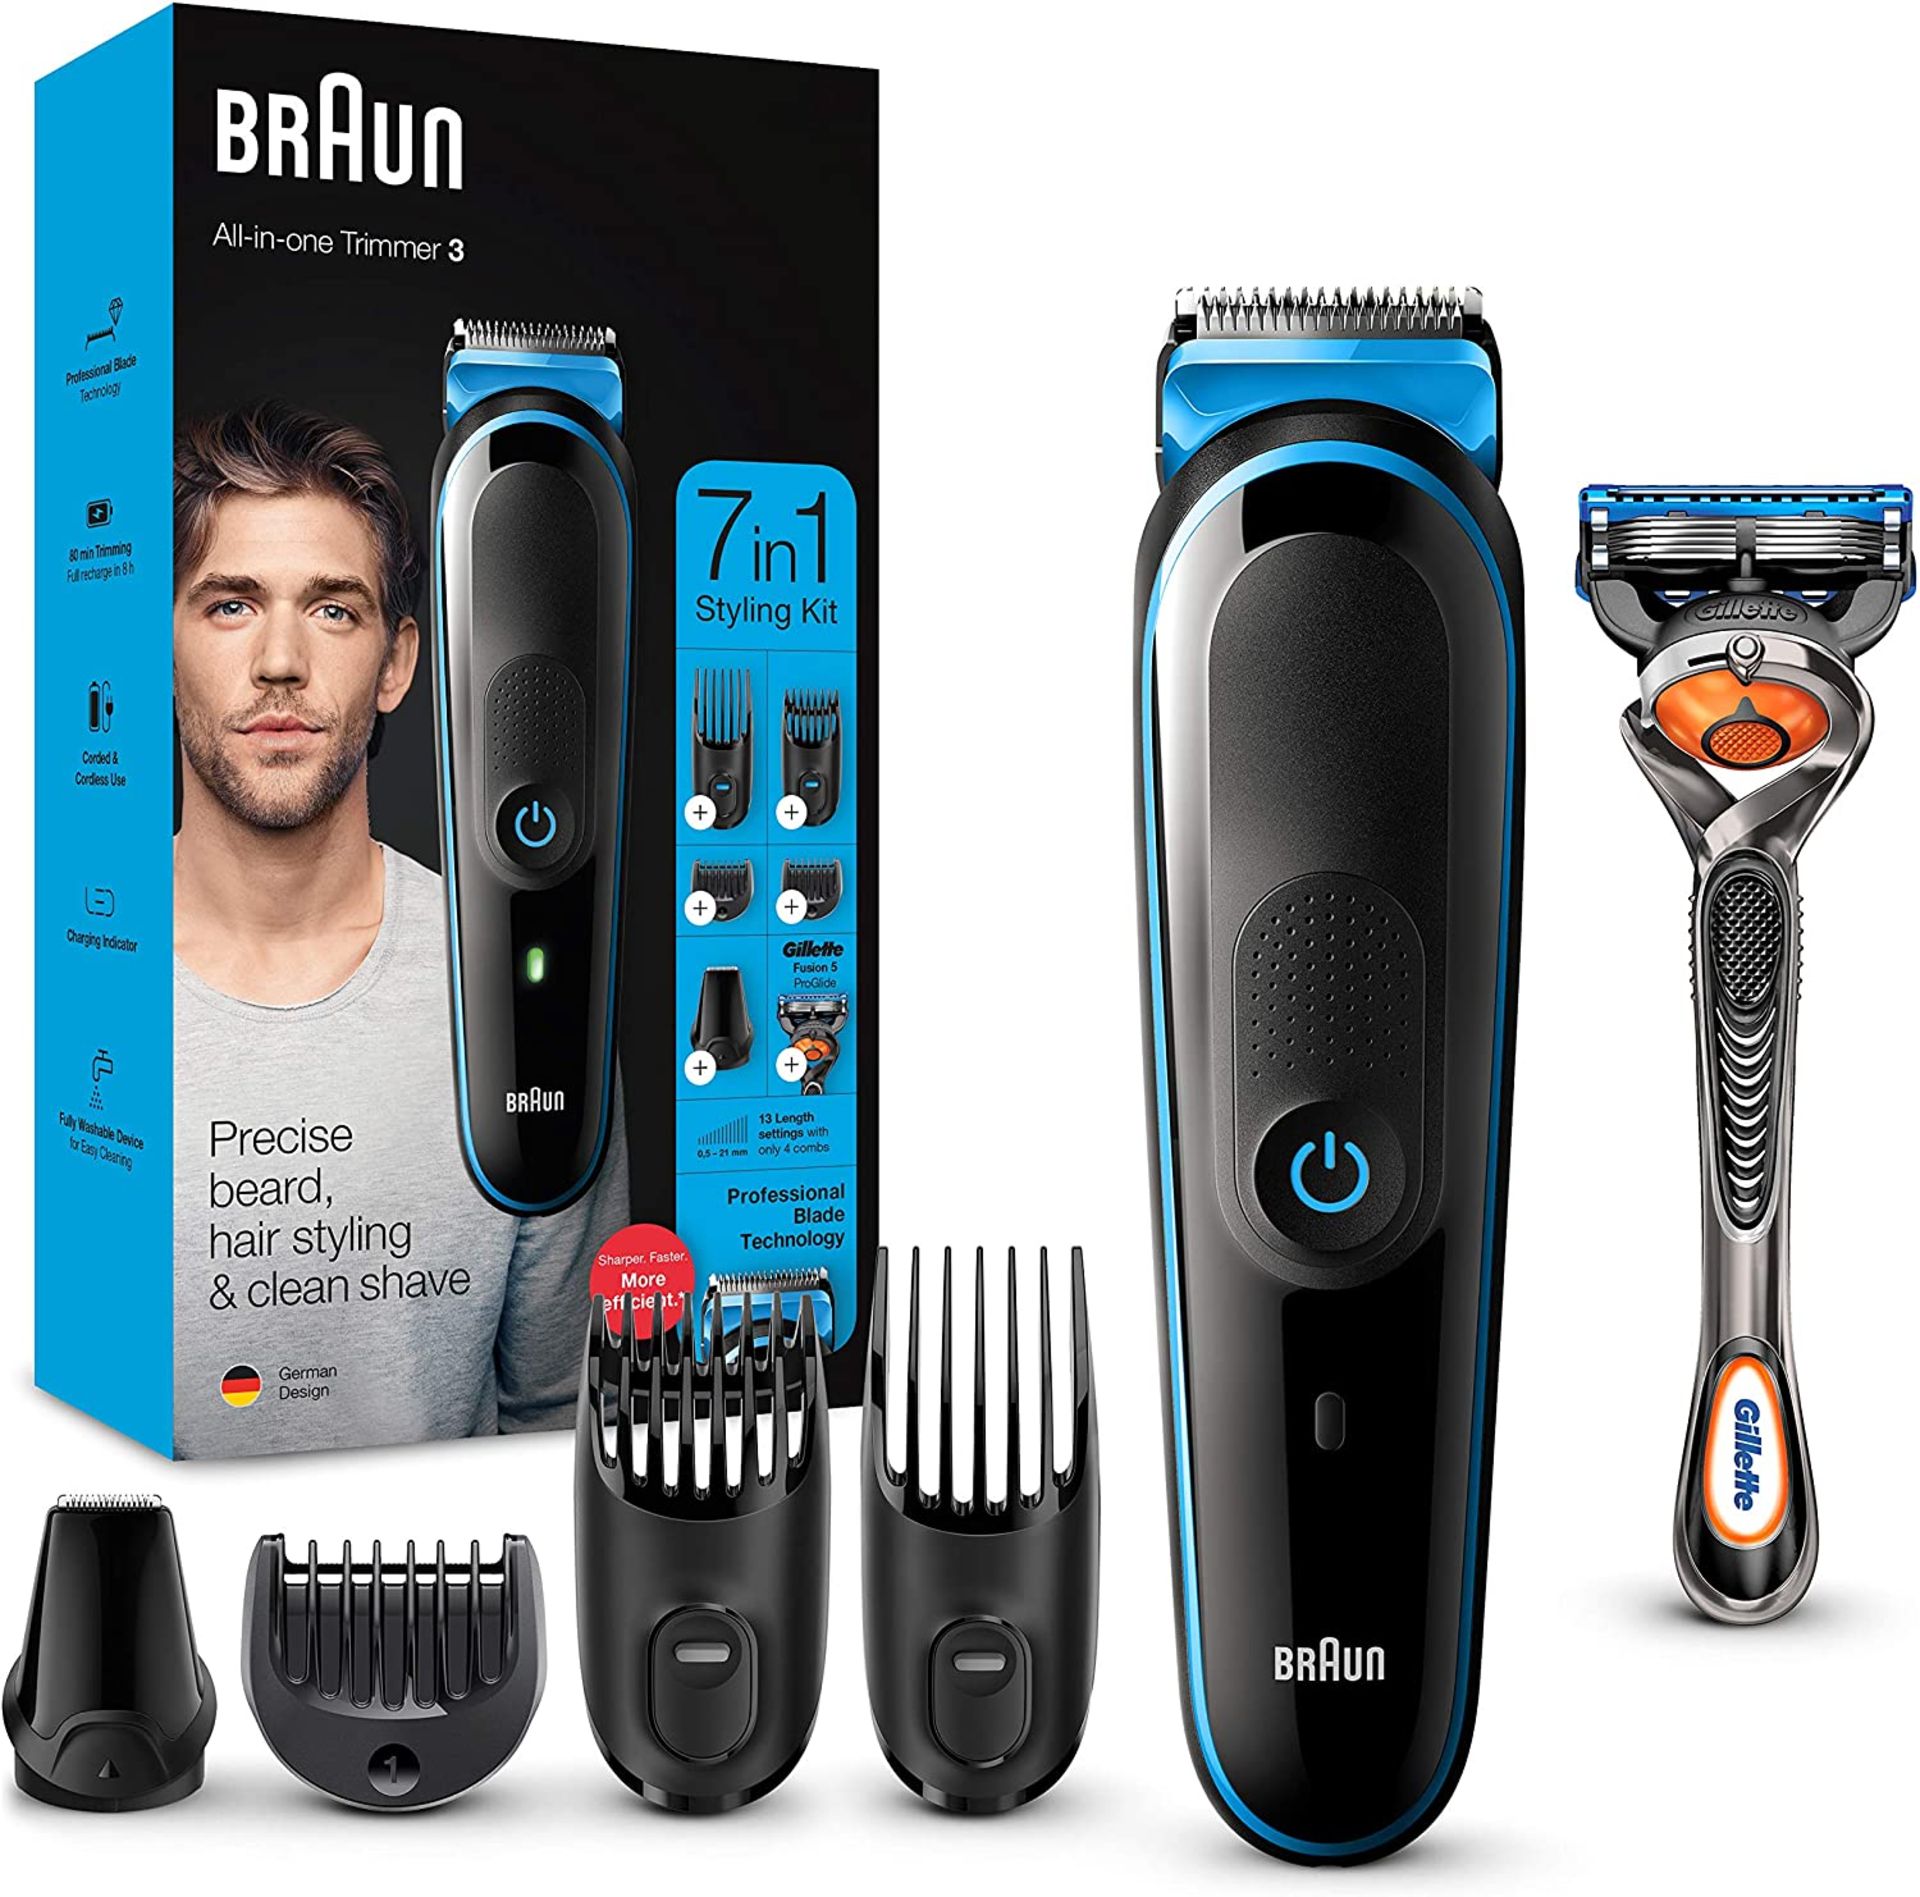 RRP £25 Braun 7-in-1 All-in-one Trimmer 3 MGK3245, Beard Trimmer for Men, Hair Clipper and Face Trim